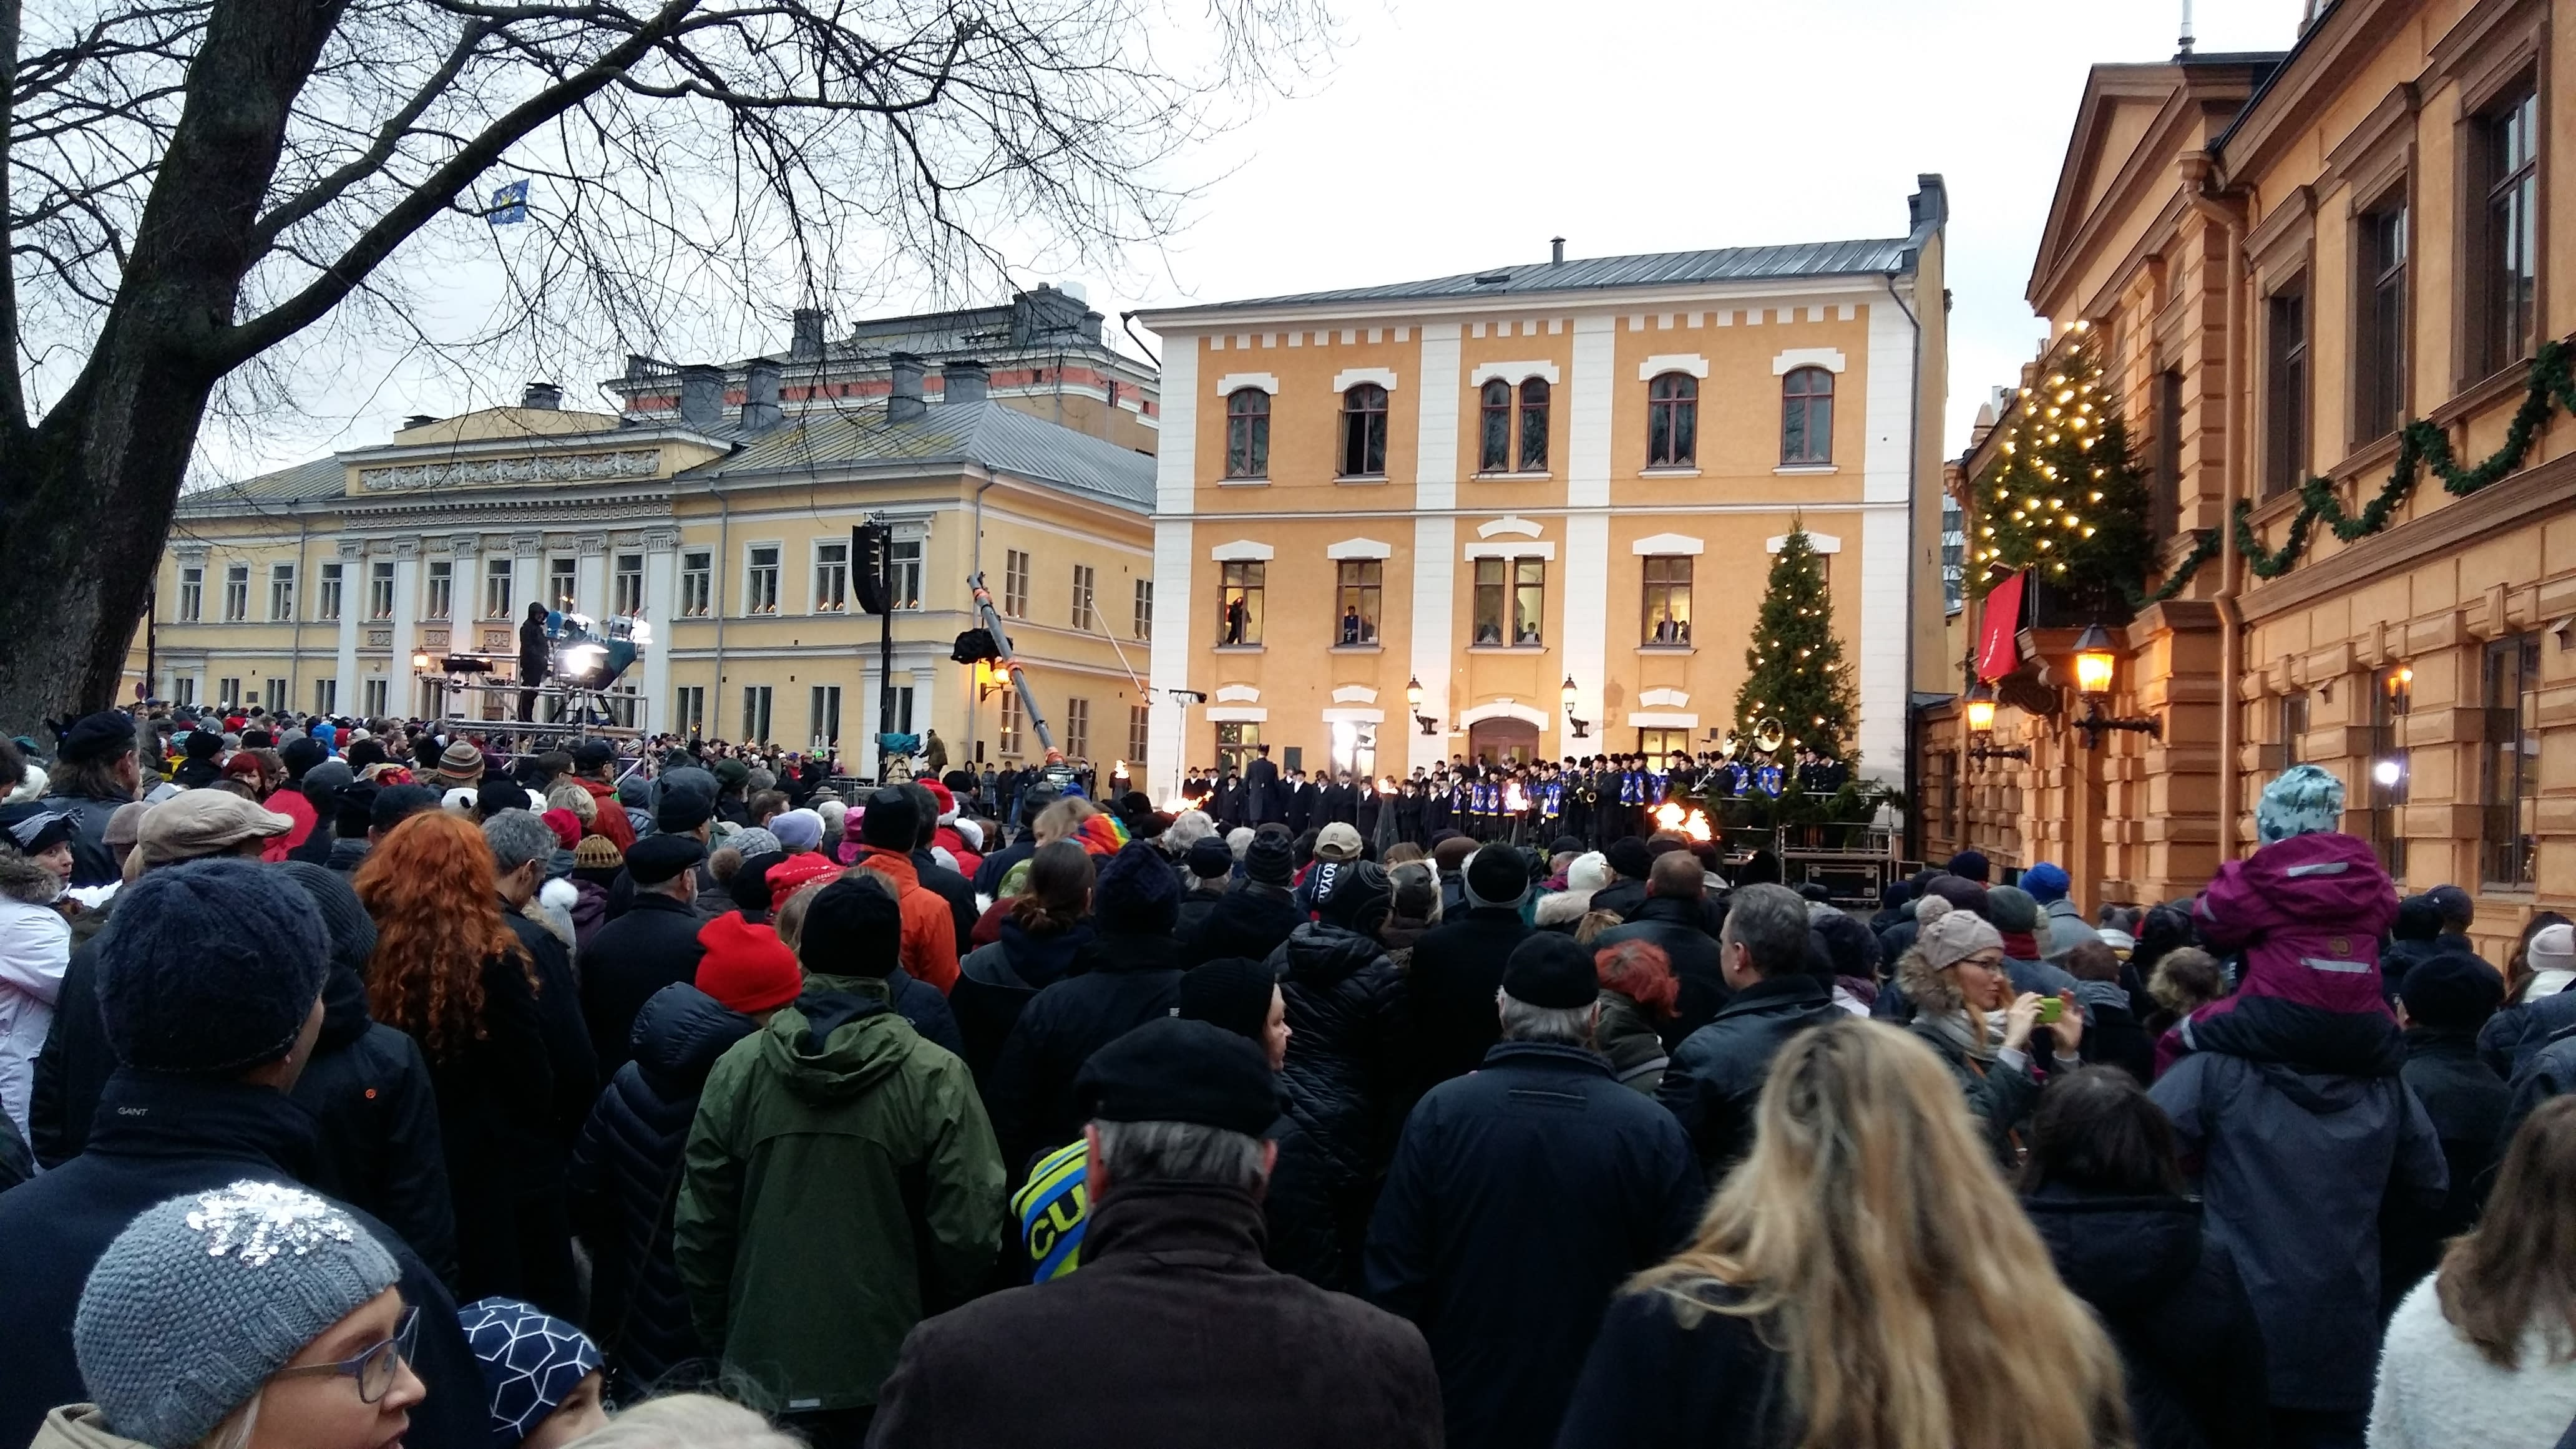 Turku intends to allow public participation in the Christmas peace declaration